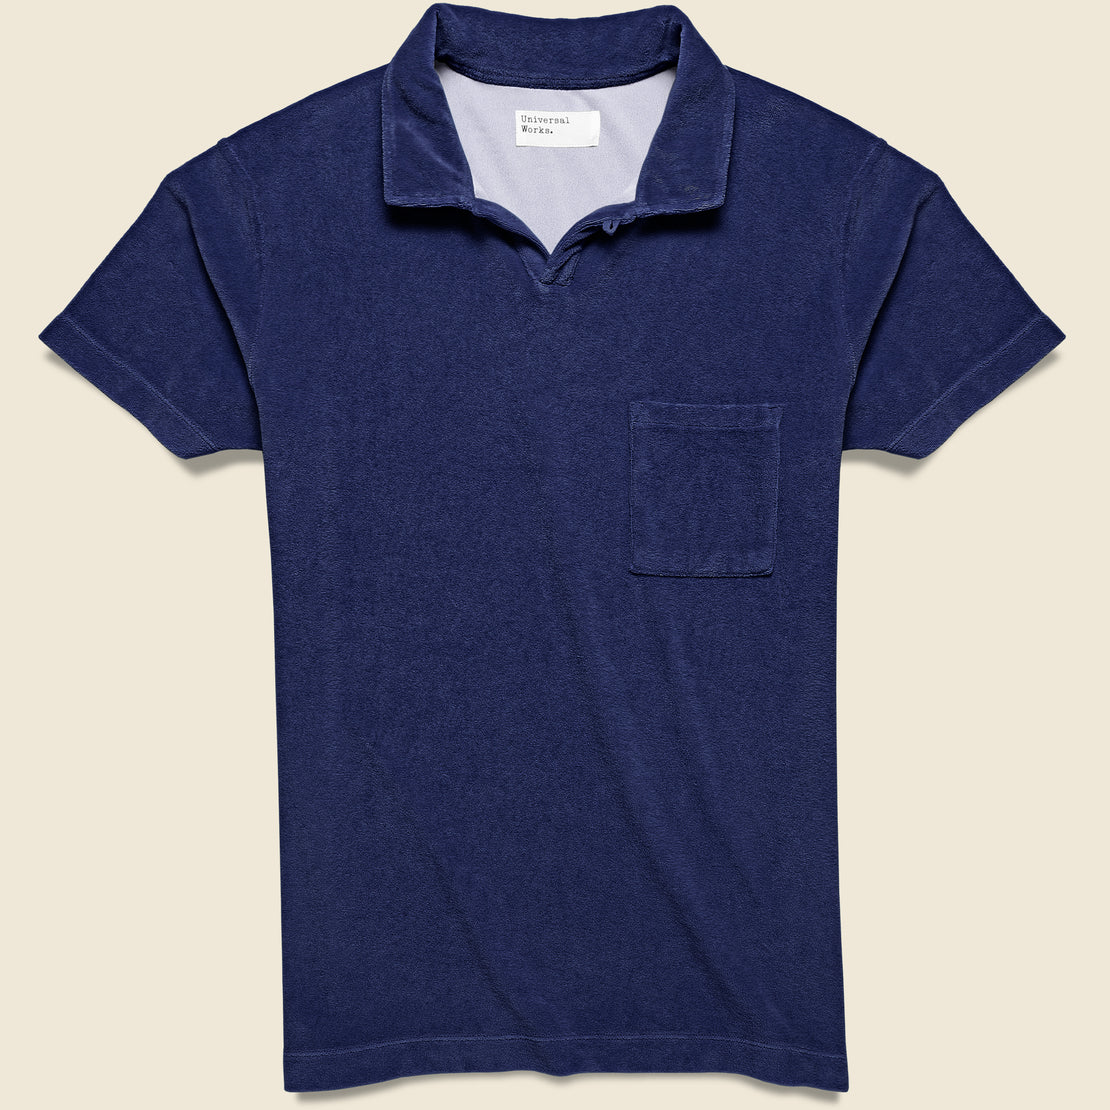 Universal Works Terry Fleece Vacation Polo - Ink Blue